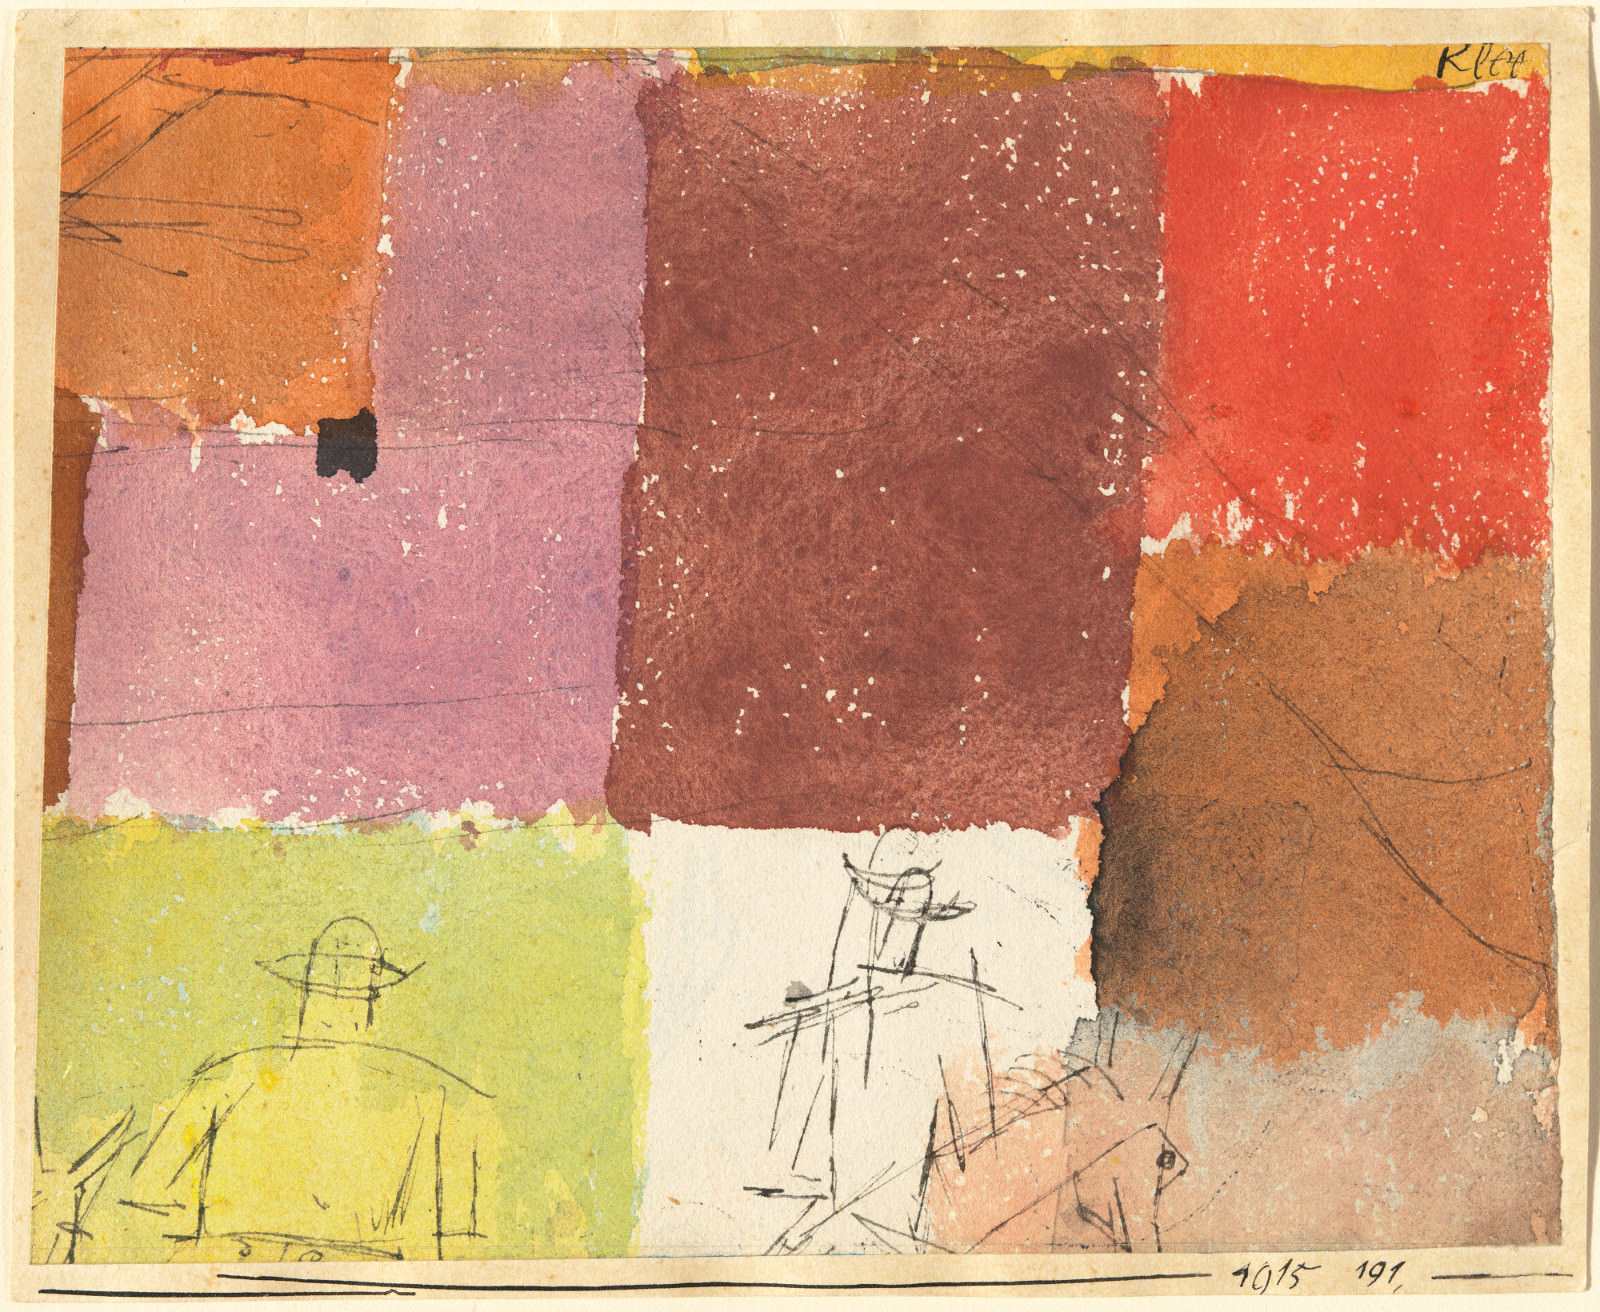 Fig. 7 – Paul Klee, Composition with Figures, 1915, Pen and ink and watercolor on paper mounted on card stock , Sheet: 10.16 × 12.7 cm (4 × 5 in.) mount: 10.8 × 13.02 cm (4 1/4 × 5 1/8 in.). National Gallery of Art, Washington. Collection of Mr. and Mrs. Paul Mellon.